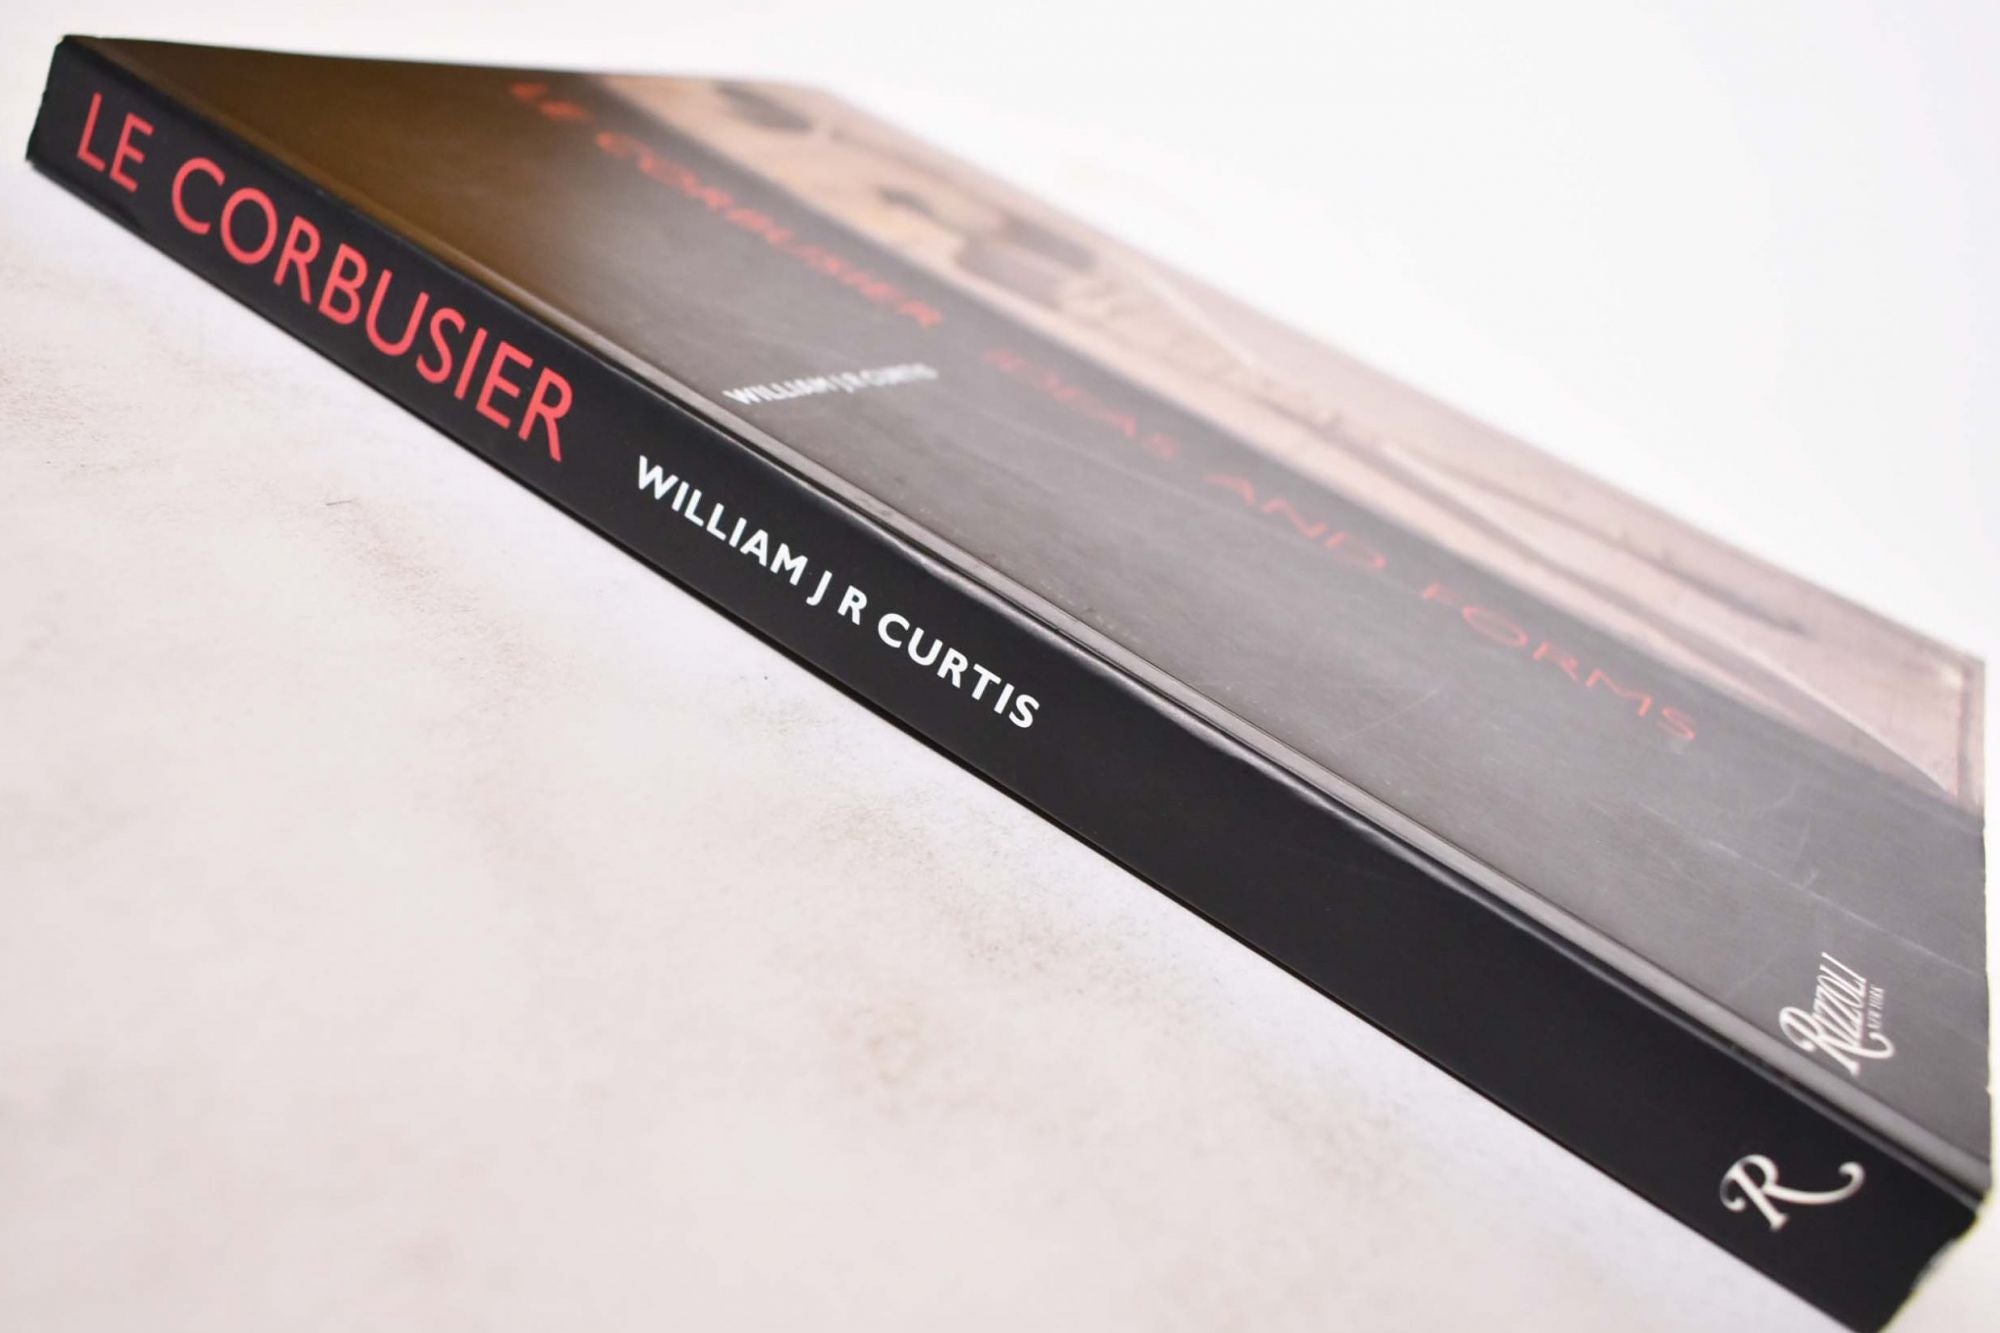 Le Corbusier: Ideas and Forms by William J. R. Curtis on Mullen Books